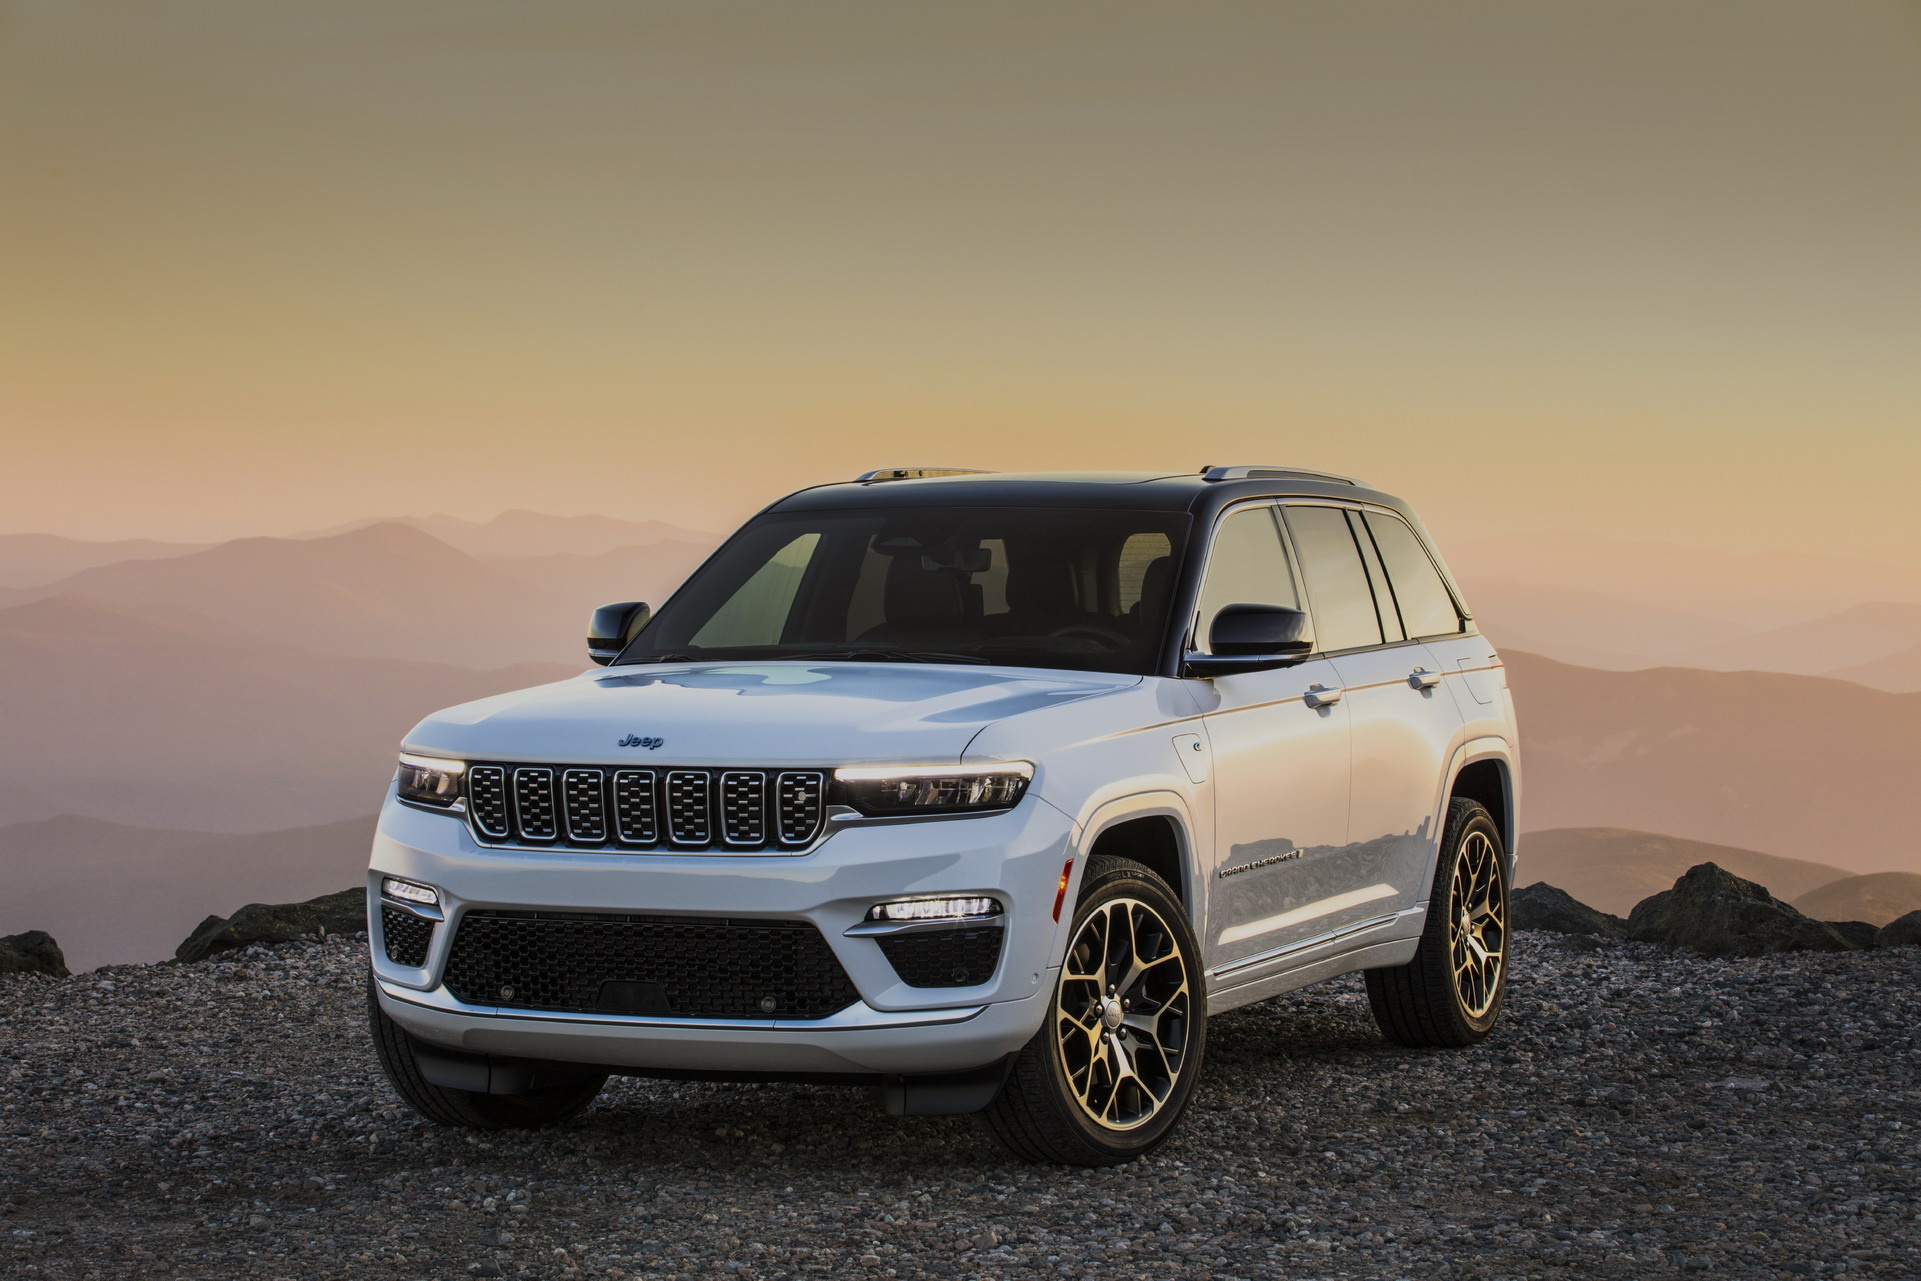 Jeep Cherokee, Summit Reserve edition, Stunning wallpapers, Automotive excellence, 1930x1290 HD Desktop